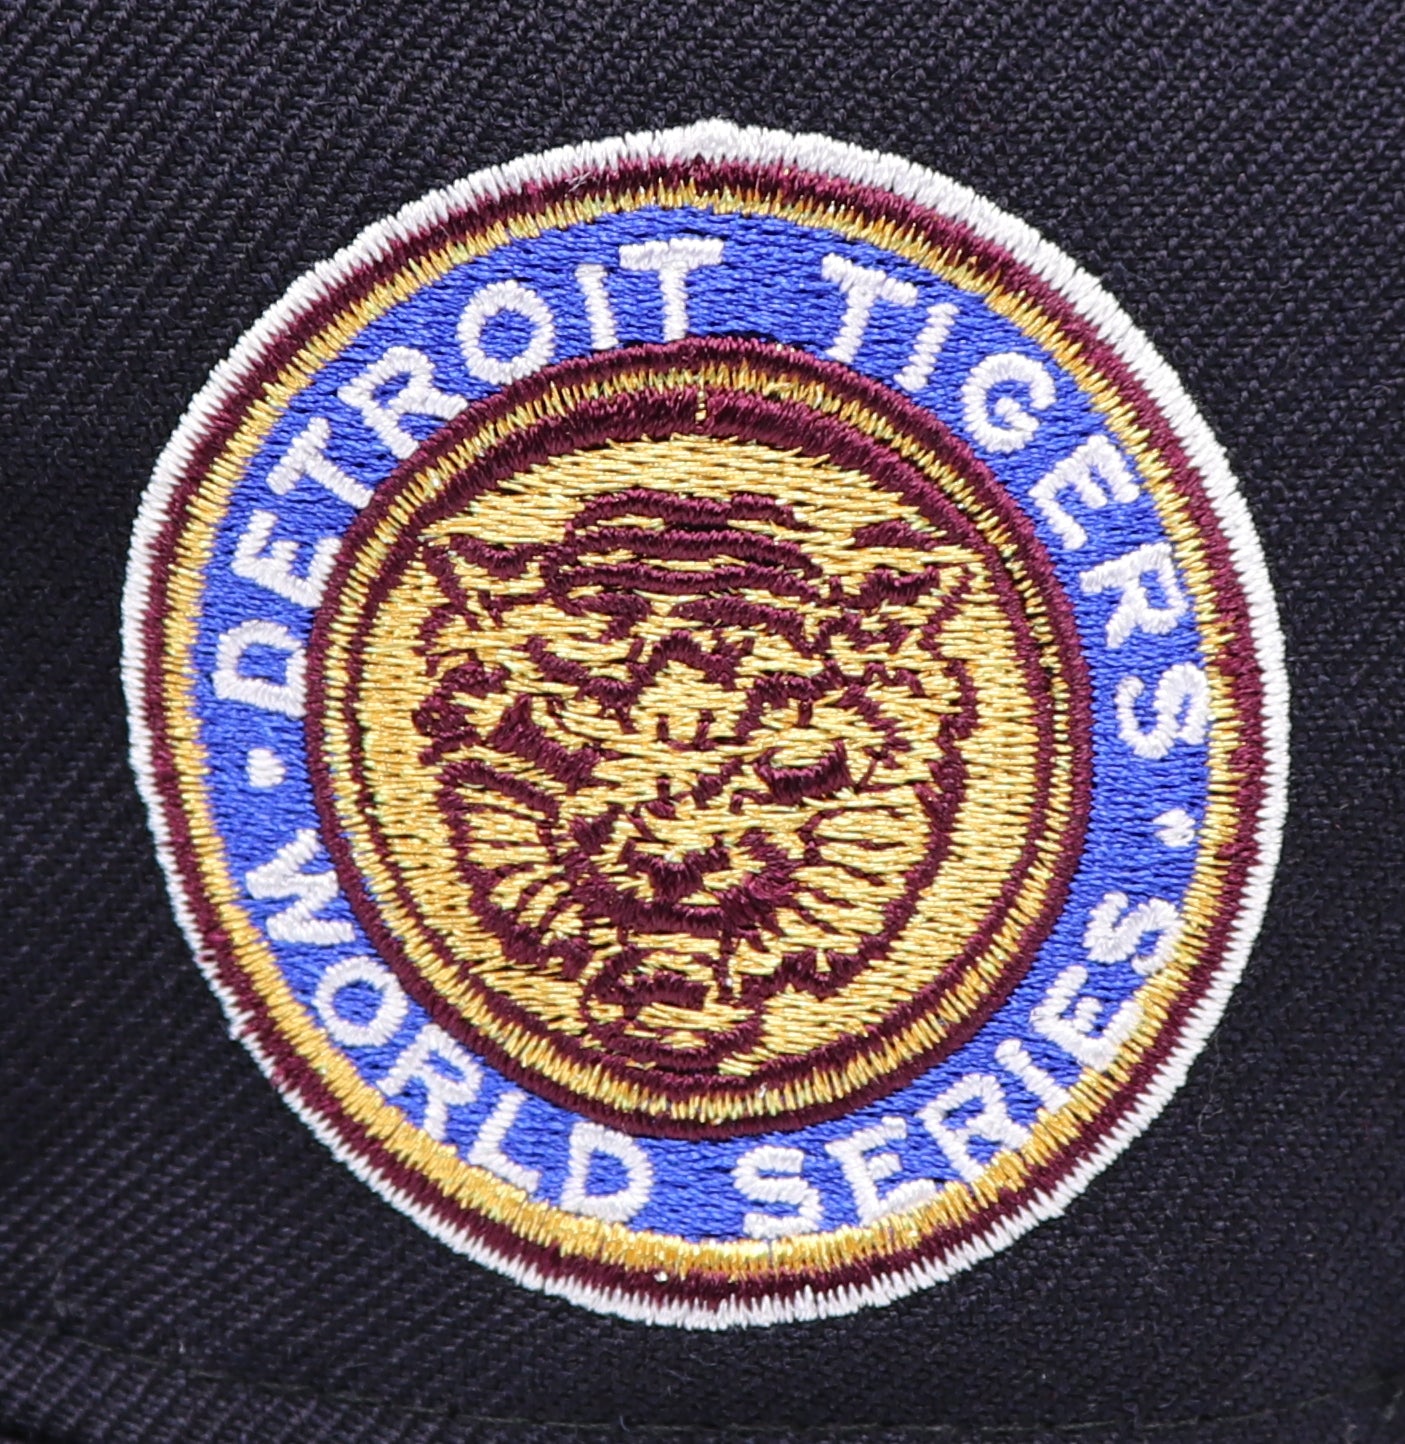 Light Tan Detroit Tigers Kelly Visor Lime Green Bottom 1968 world champions  Side Patch New Era 59Fifty Fitted